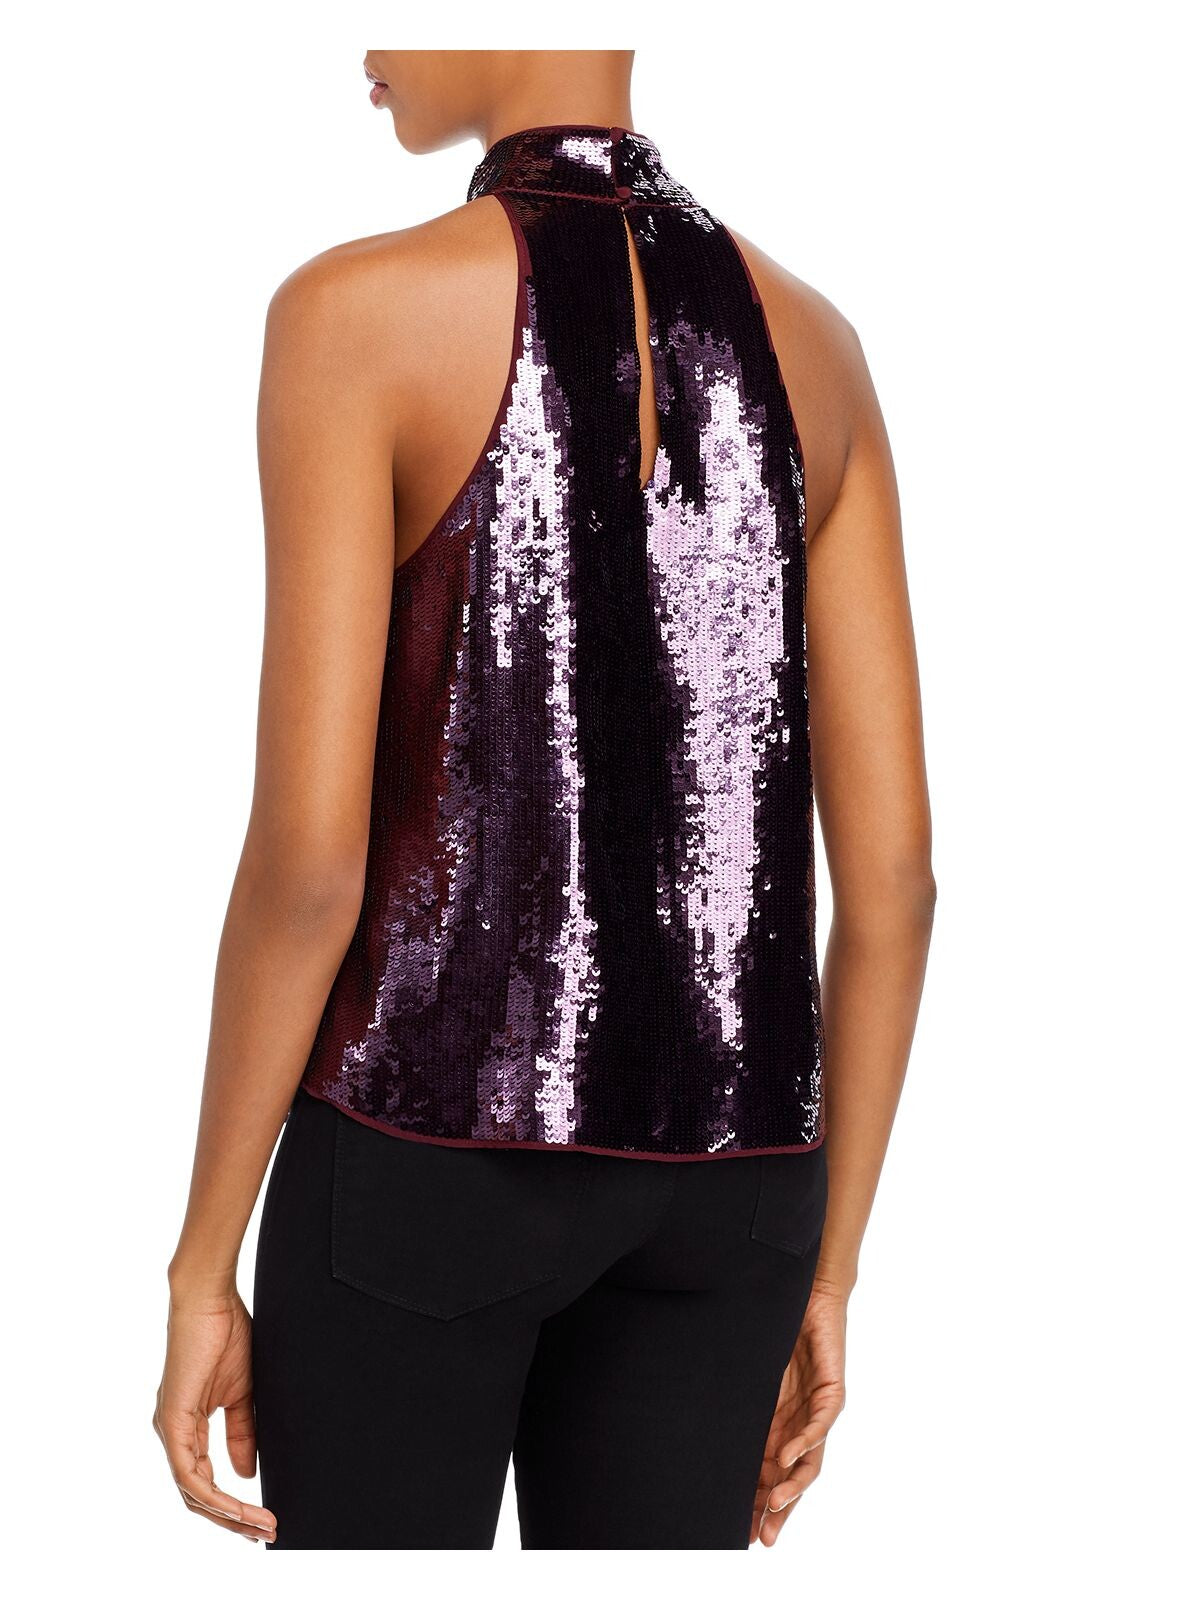 JOIE Womens Sequined Sleeveless Halter Party Top